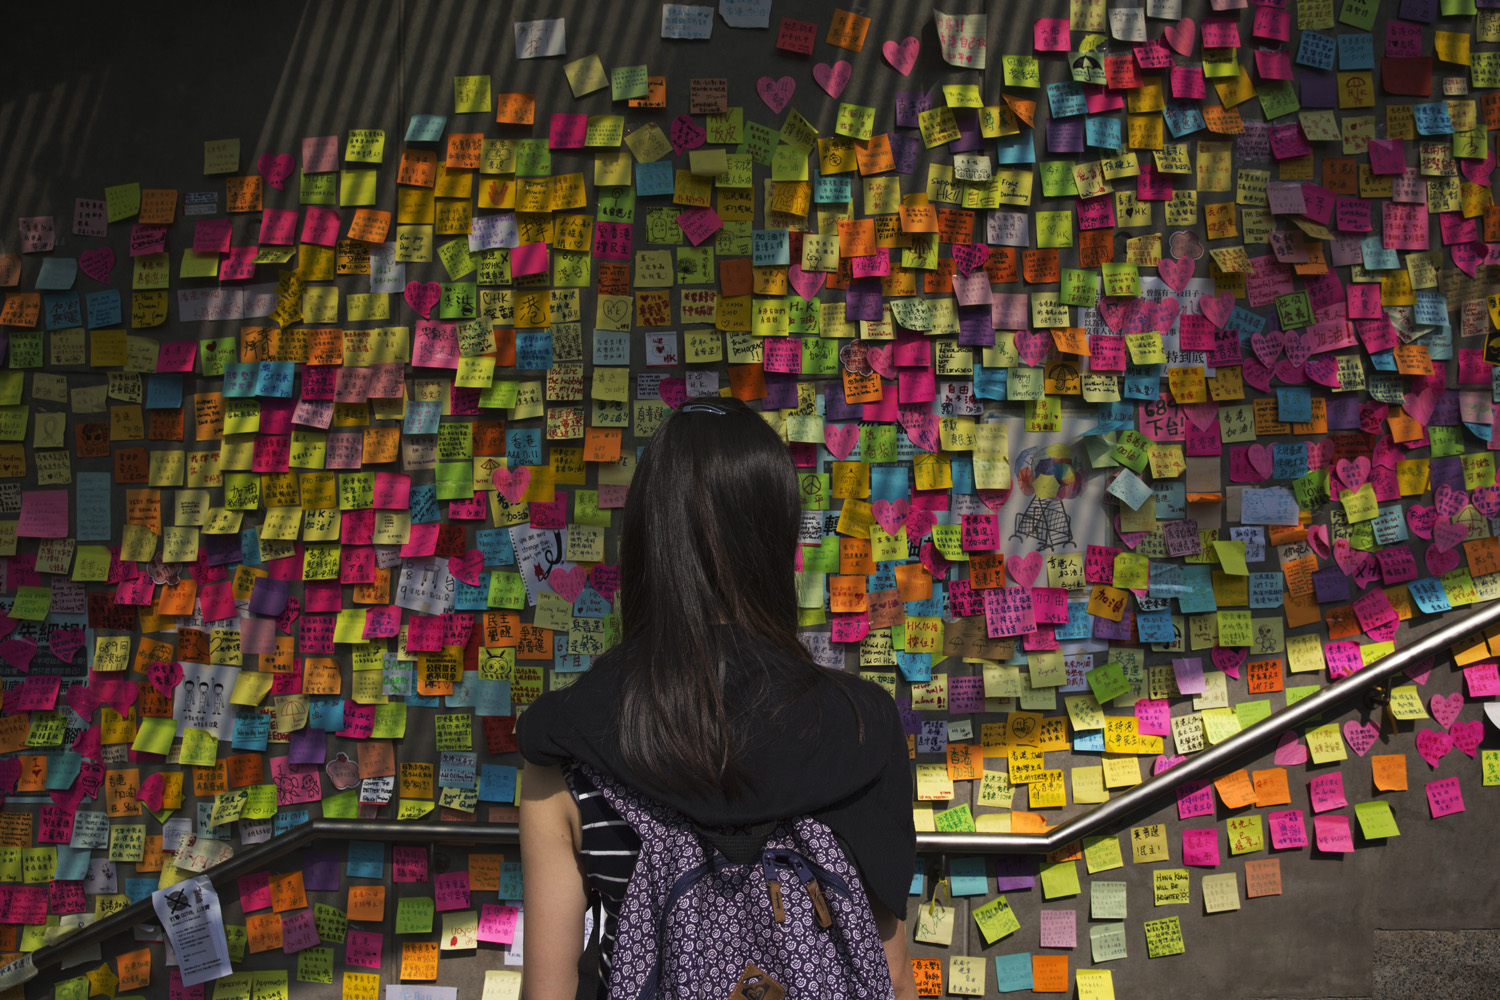 On a wall just outside Hong Kong government offices, protesters leave words of support for one another and demands for political action. (James Nachtwey for TIME)